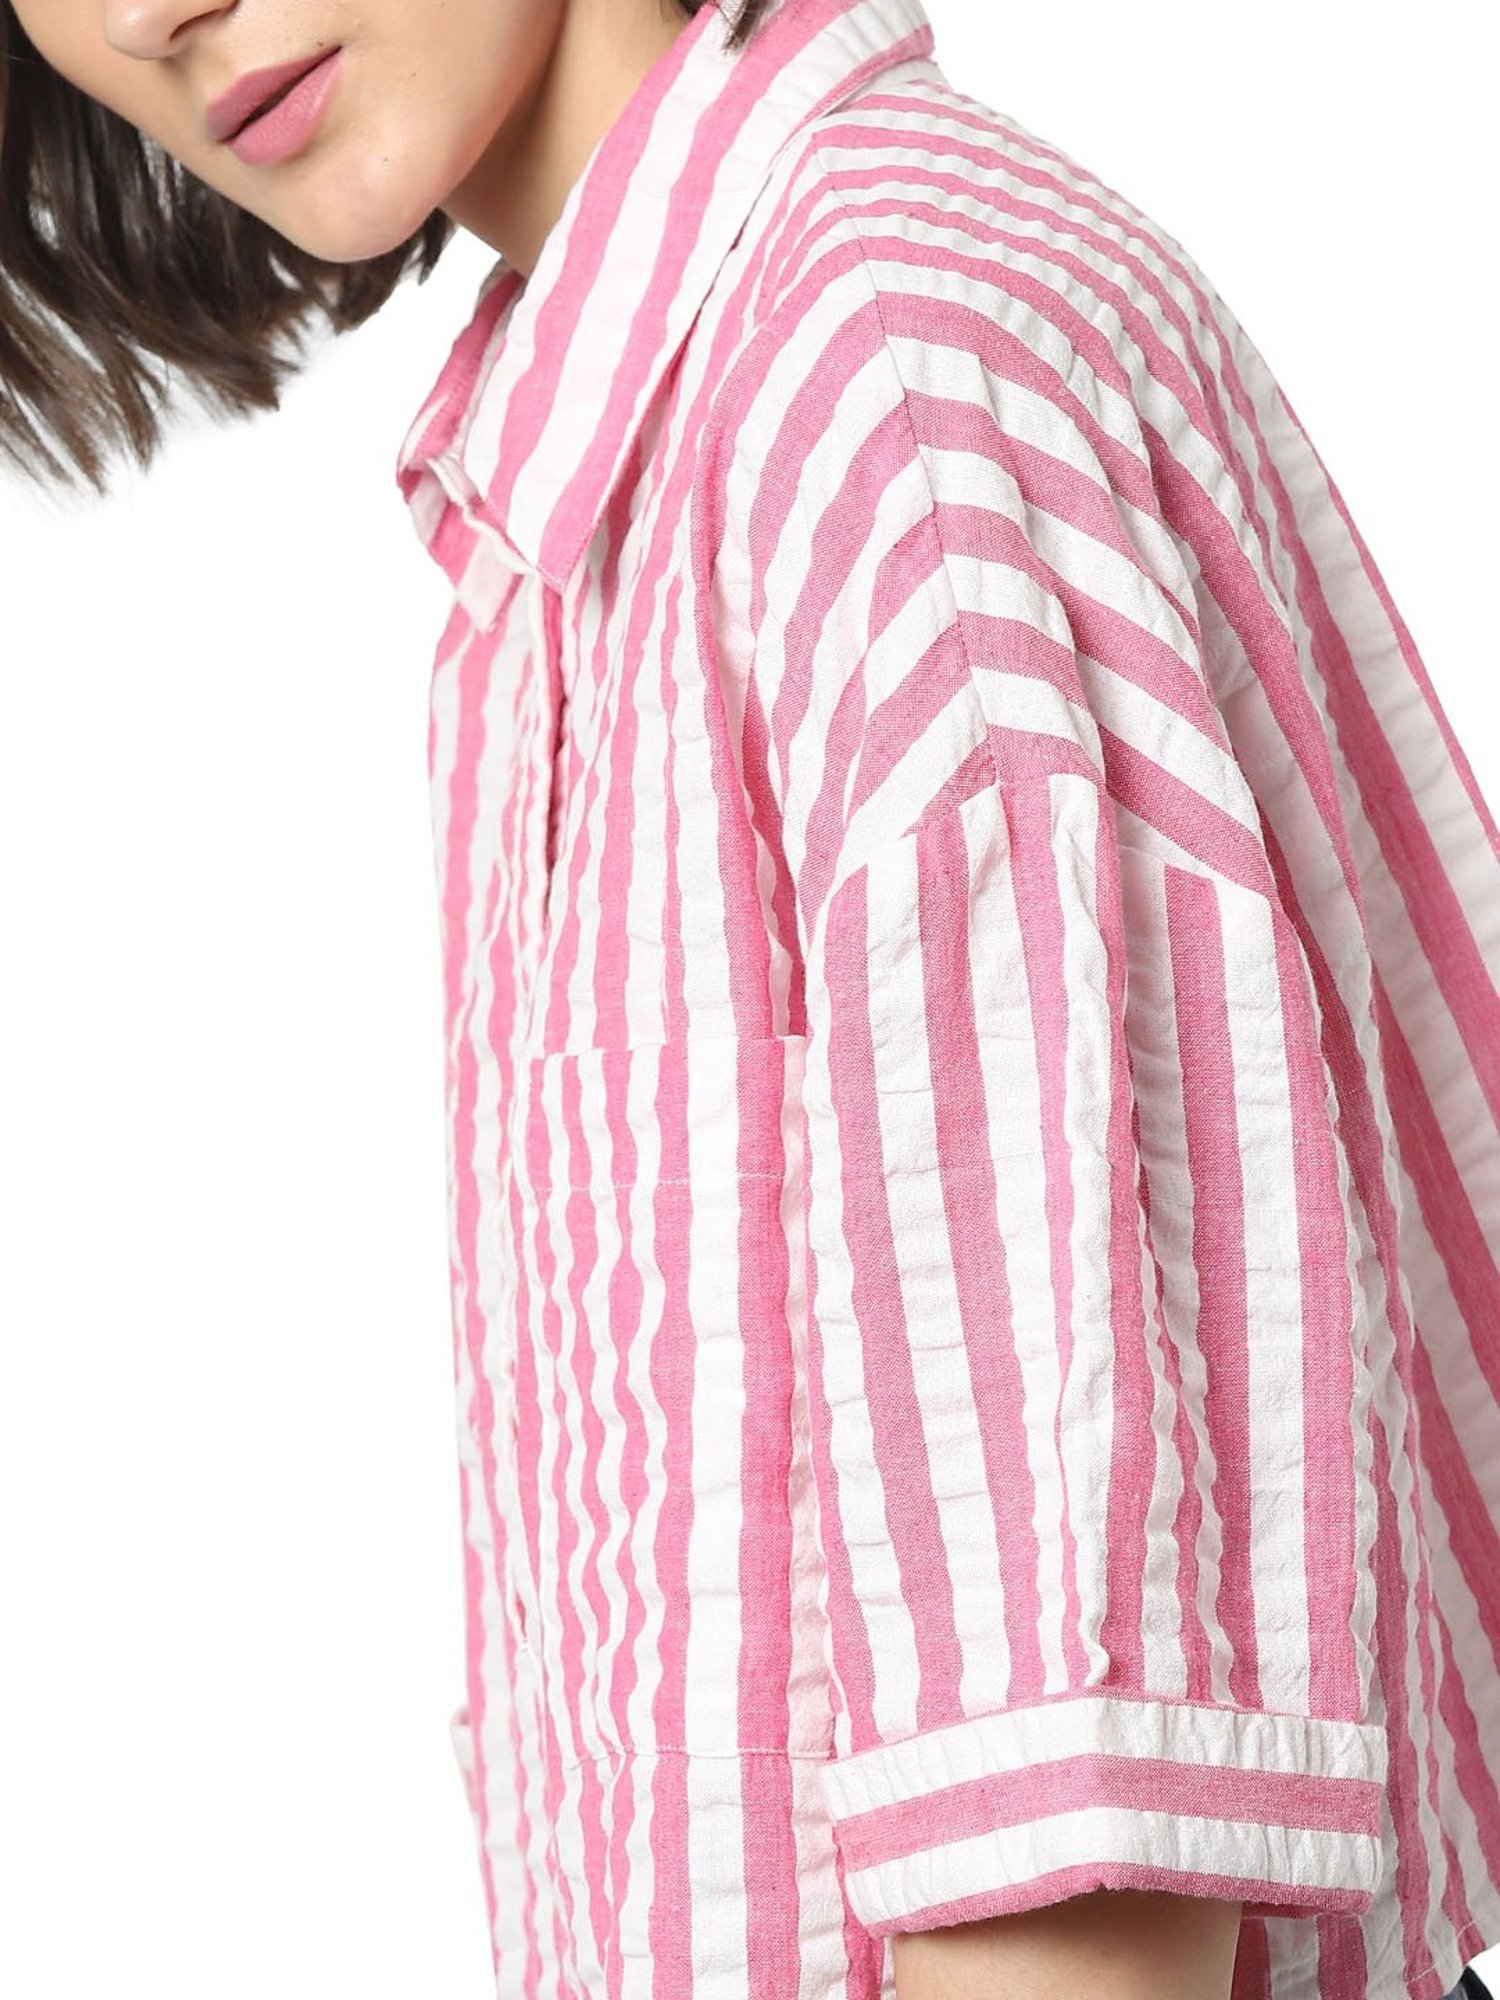 Hollywood Wide Stripe Shirt // Red + White (S) - PINK Shirtmaker - Touch of  Modern